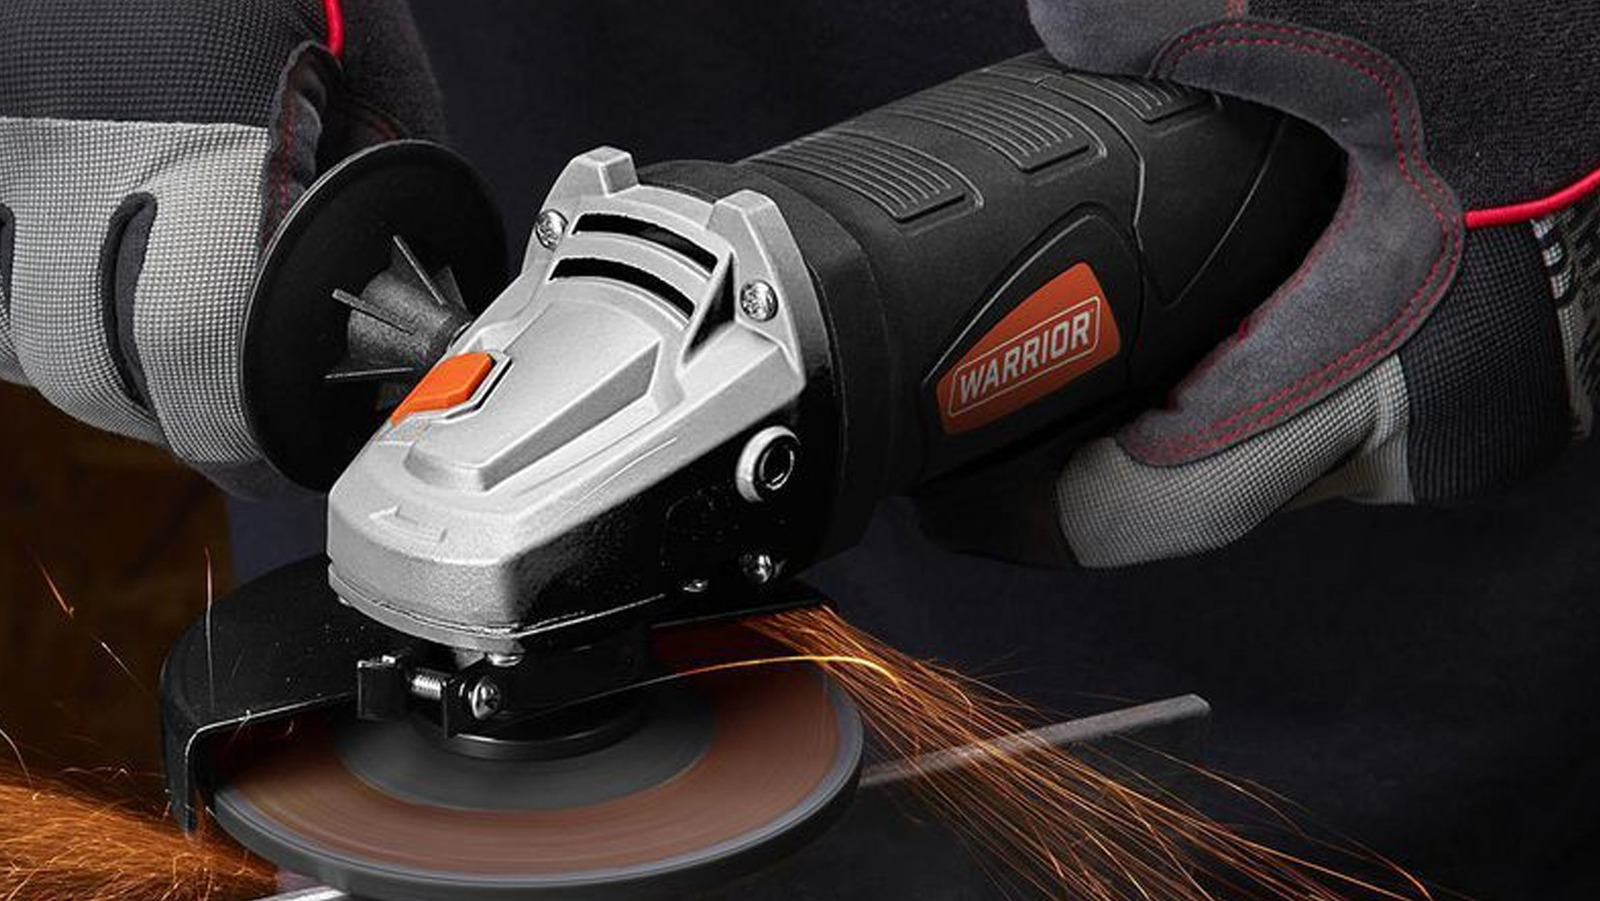 5 Of The Best Warrior Power Tools Worth Picking Up At Harbor Freight